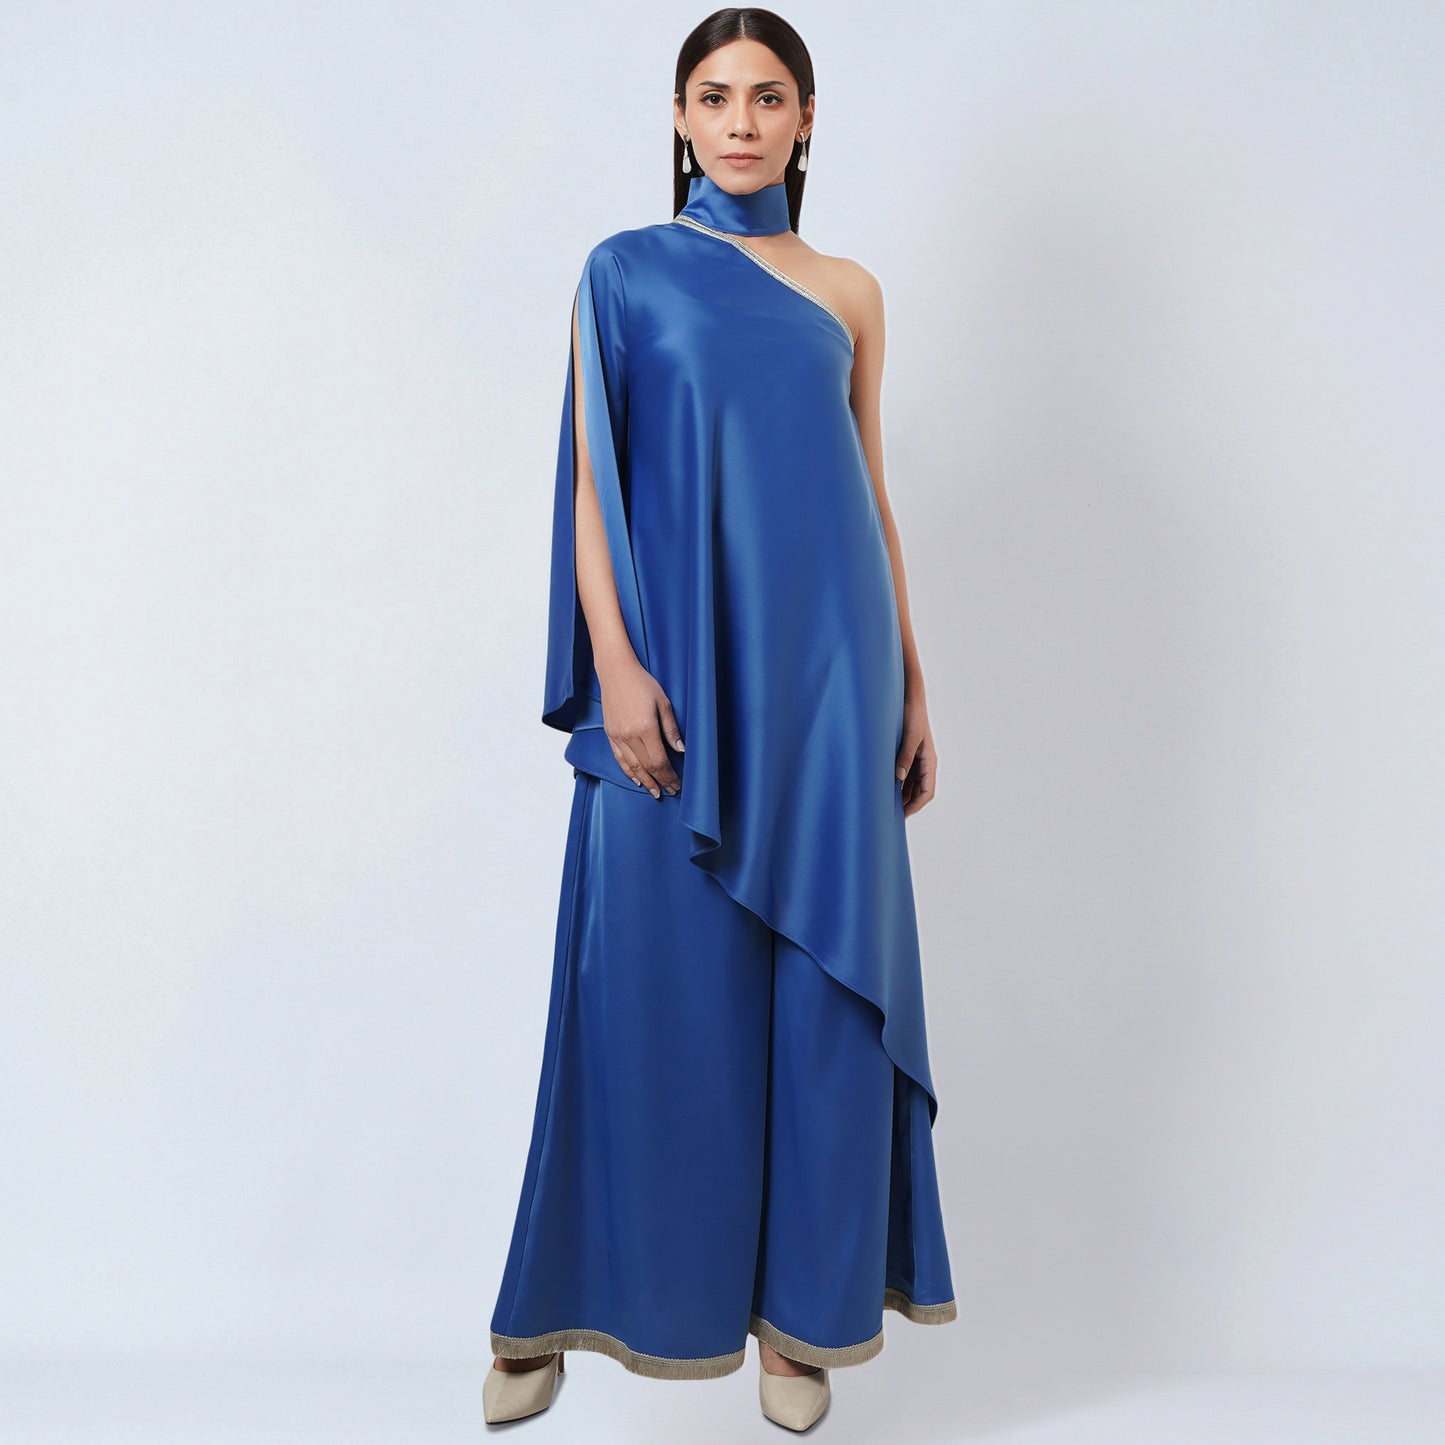 Image of This BLUE ONE-SHOULDER ASYMMETRIC TUNIC AND WIDE LEG PANTS set from our collection features a unique one-shoulder tunic and wide-leg pants. This eye-catching set is ideal for making a statement with its asymmetrical style and timeless design.  From savoirfashions.com